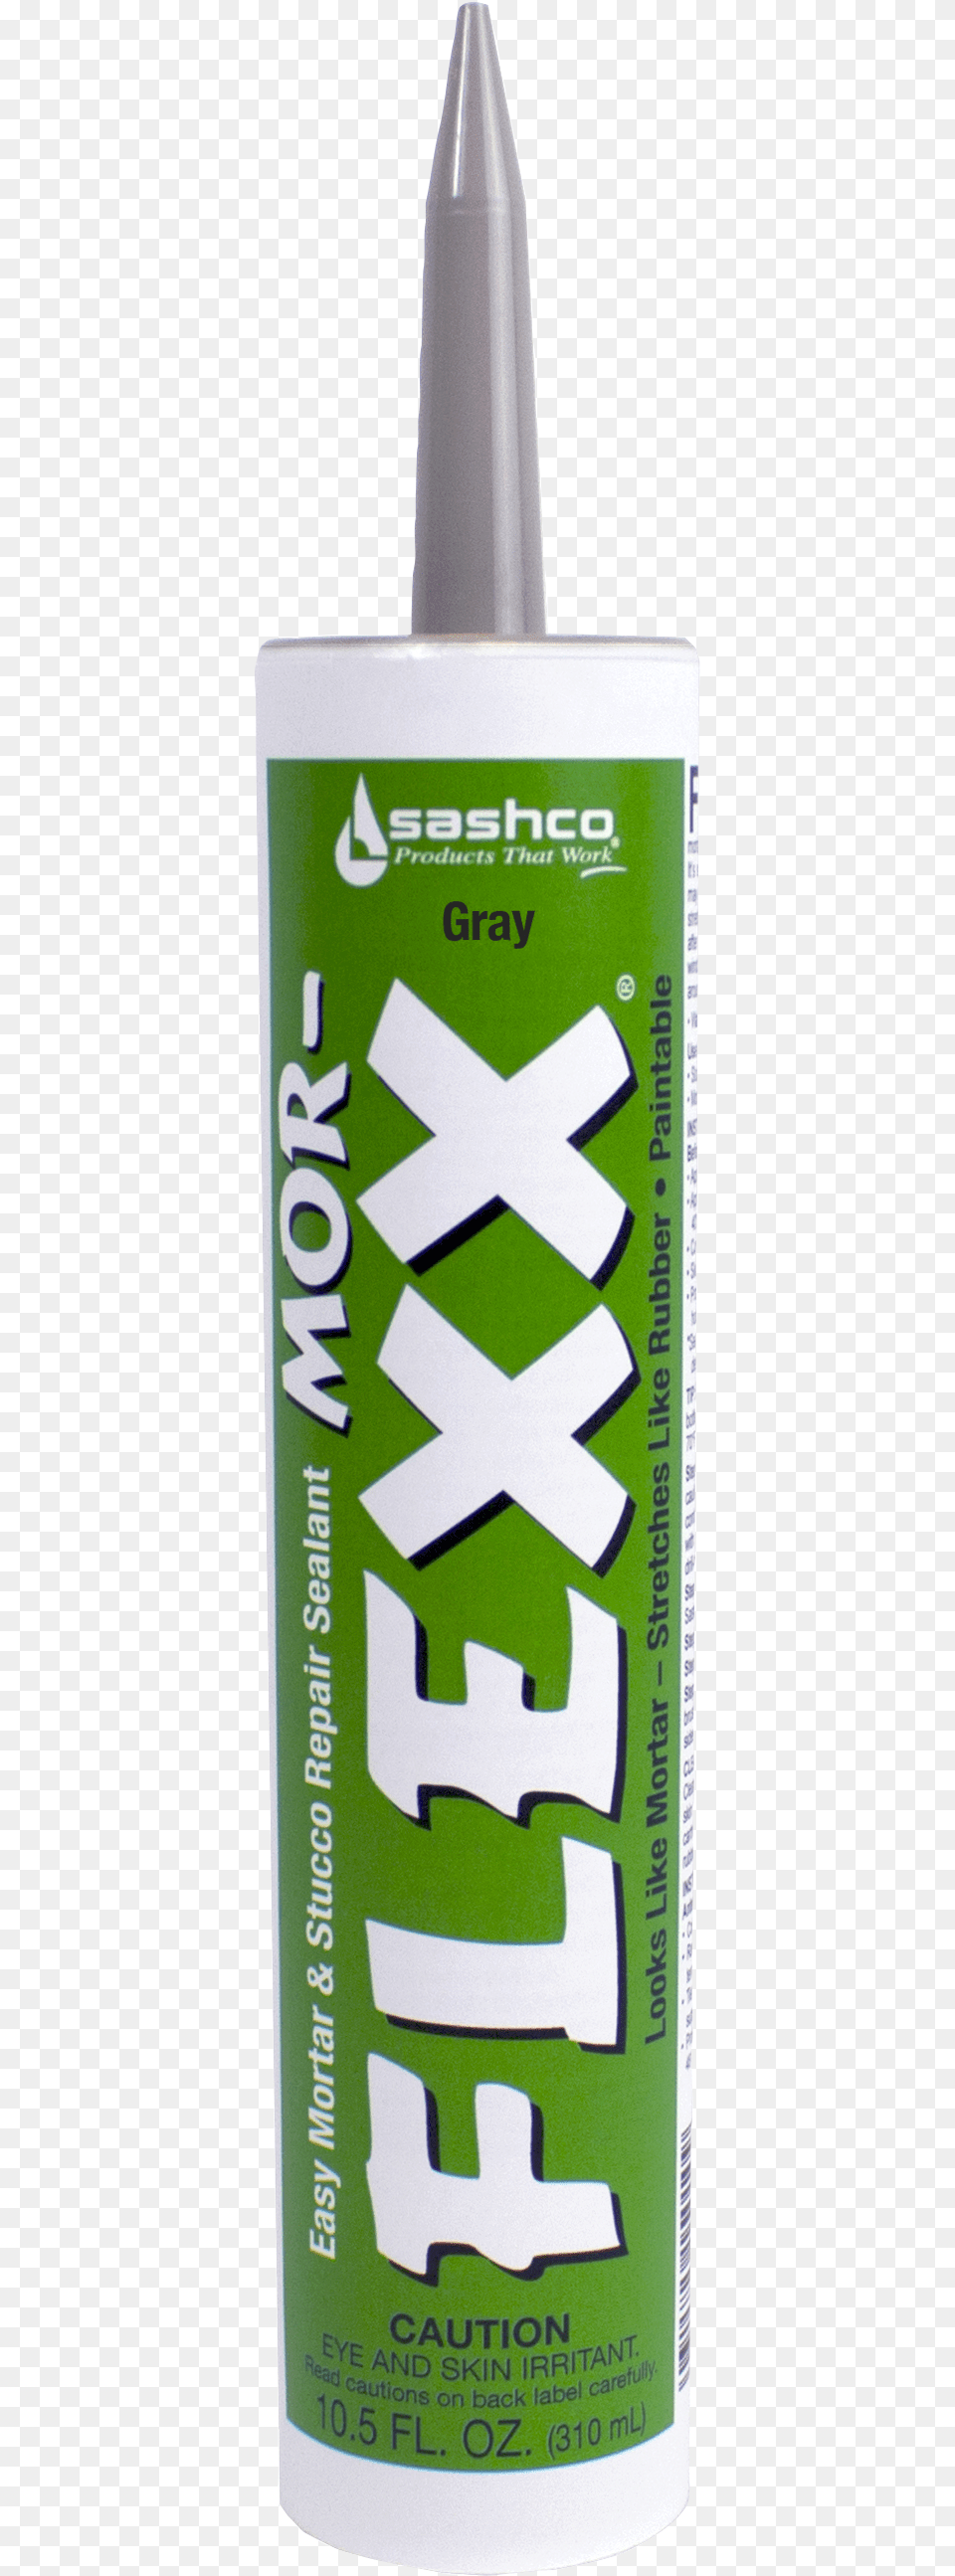 Flx Gray Ctg Sports Equipment, Bottle, Can, Tin Png Image